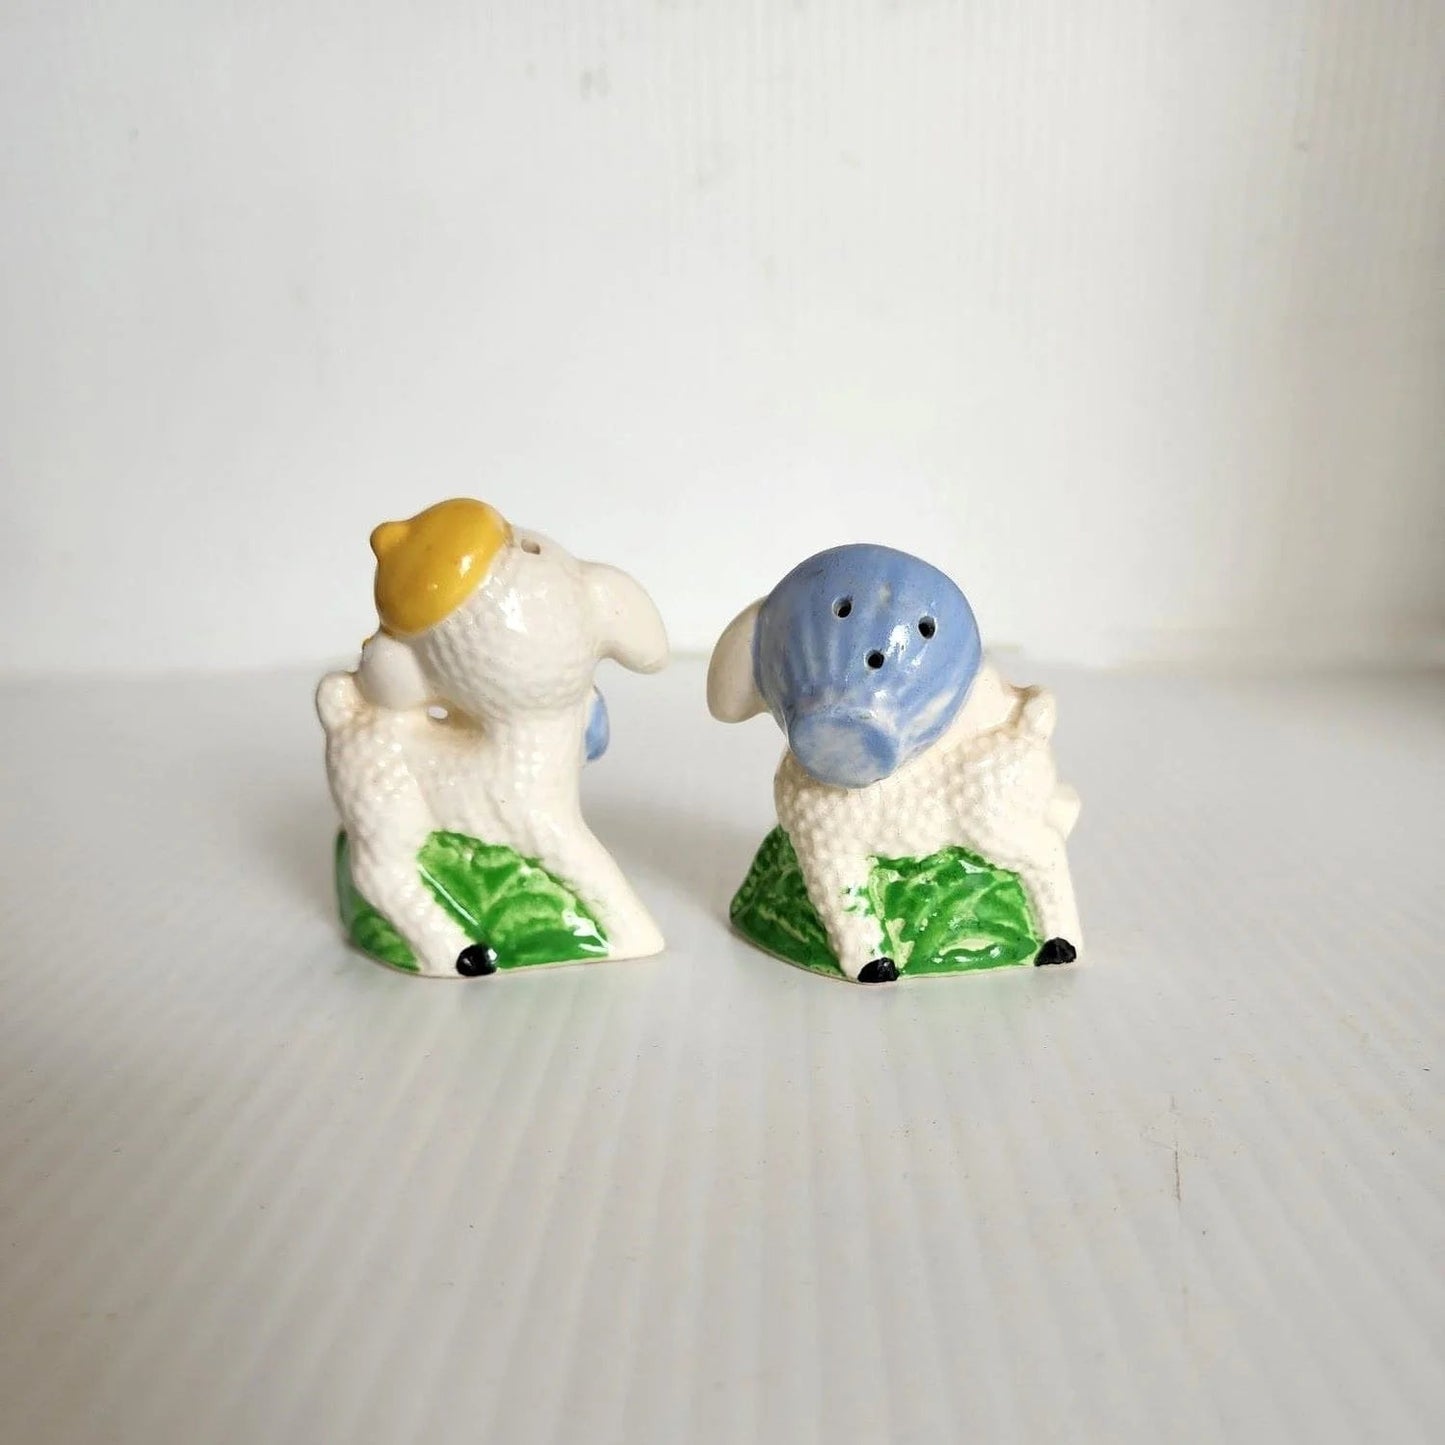 Two sheep figurines with blue bows on their heads.